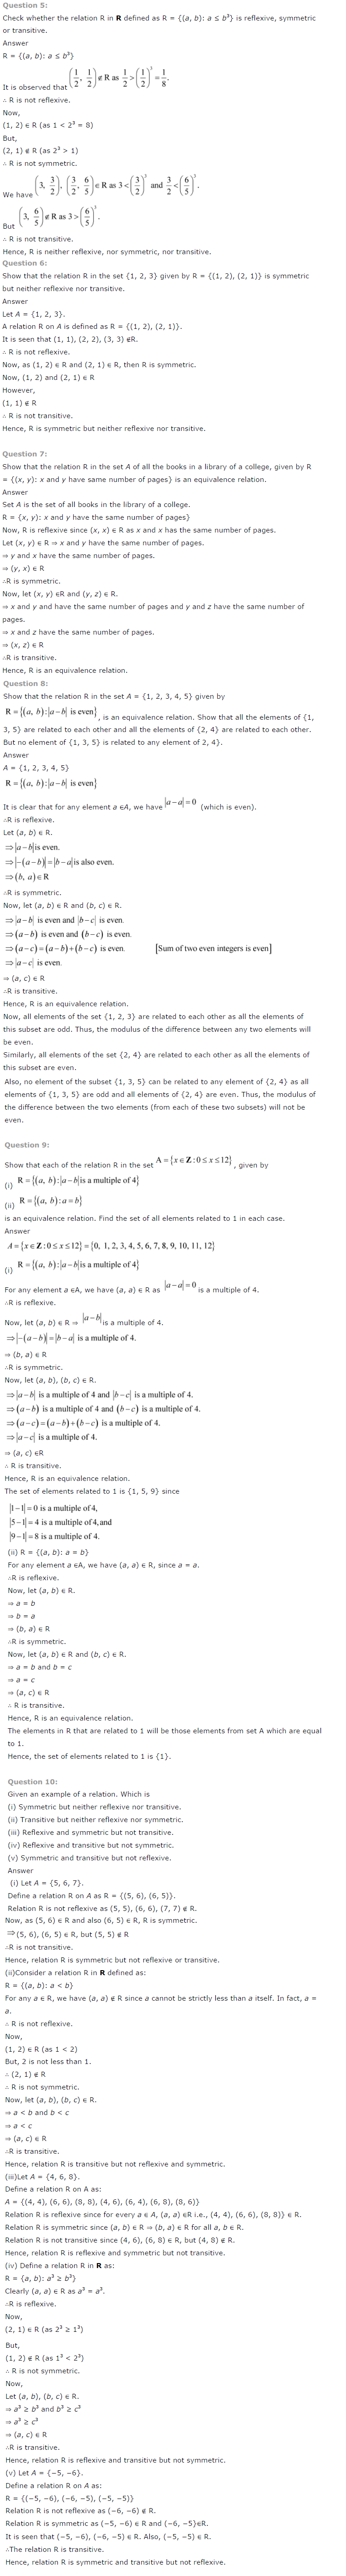 NCERT Solutions For Class 12 Maths Chapter 1 Relations and Functions-2